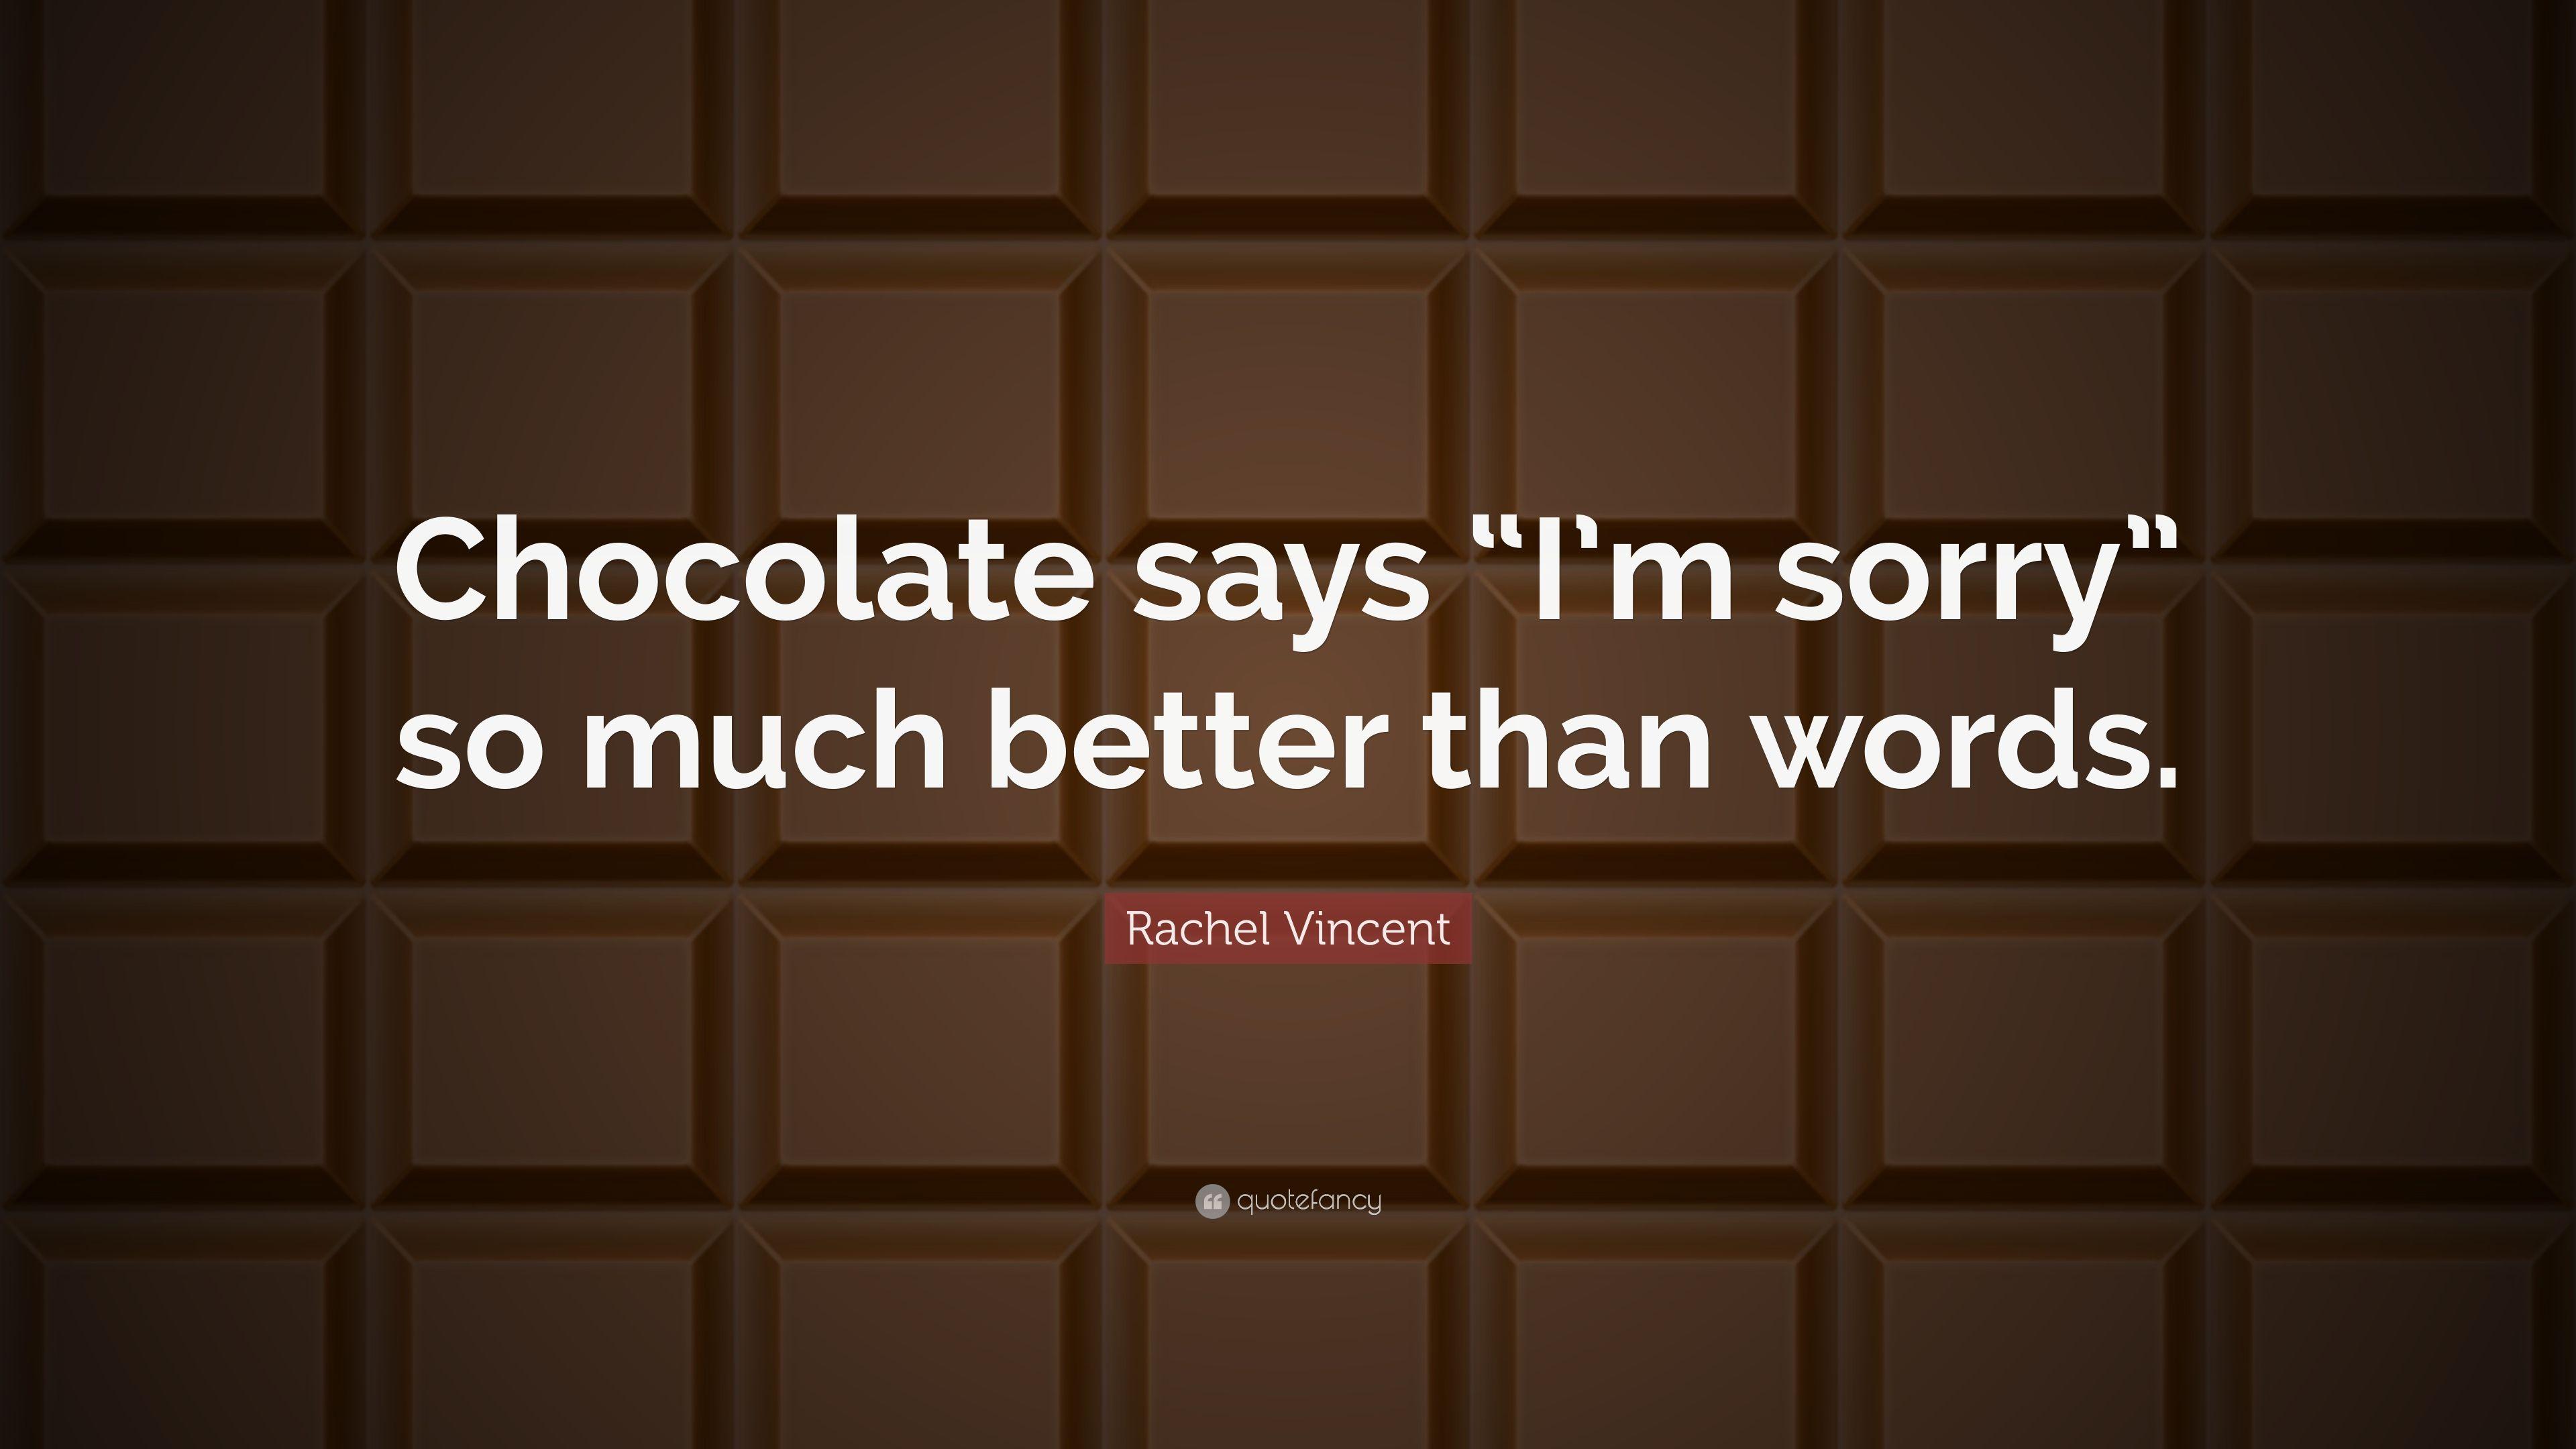 Rachel Vincent Quote: “Chocolate says “I'm sorry” so much better